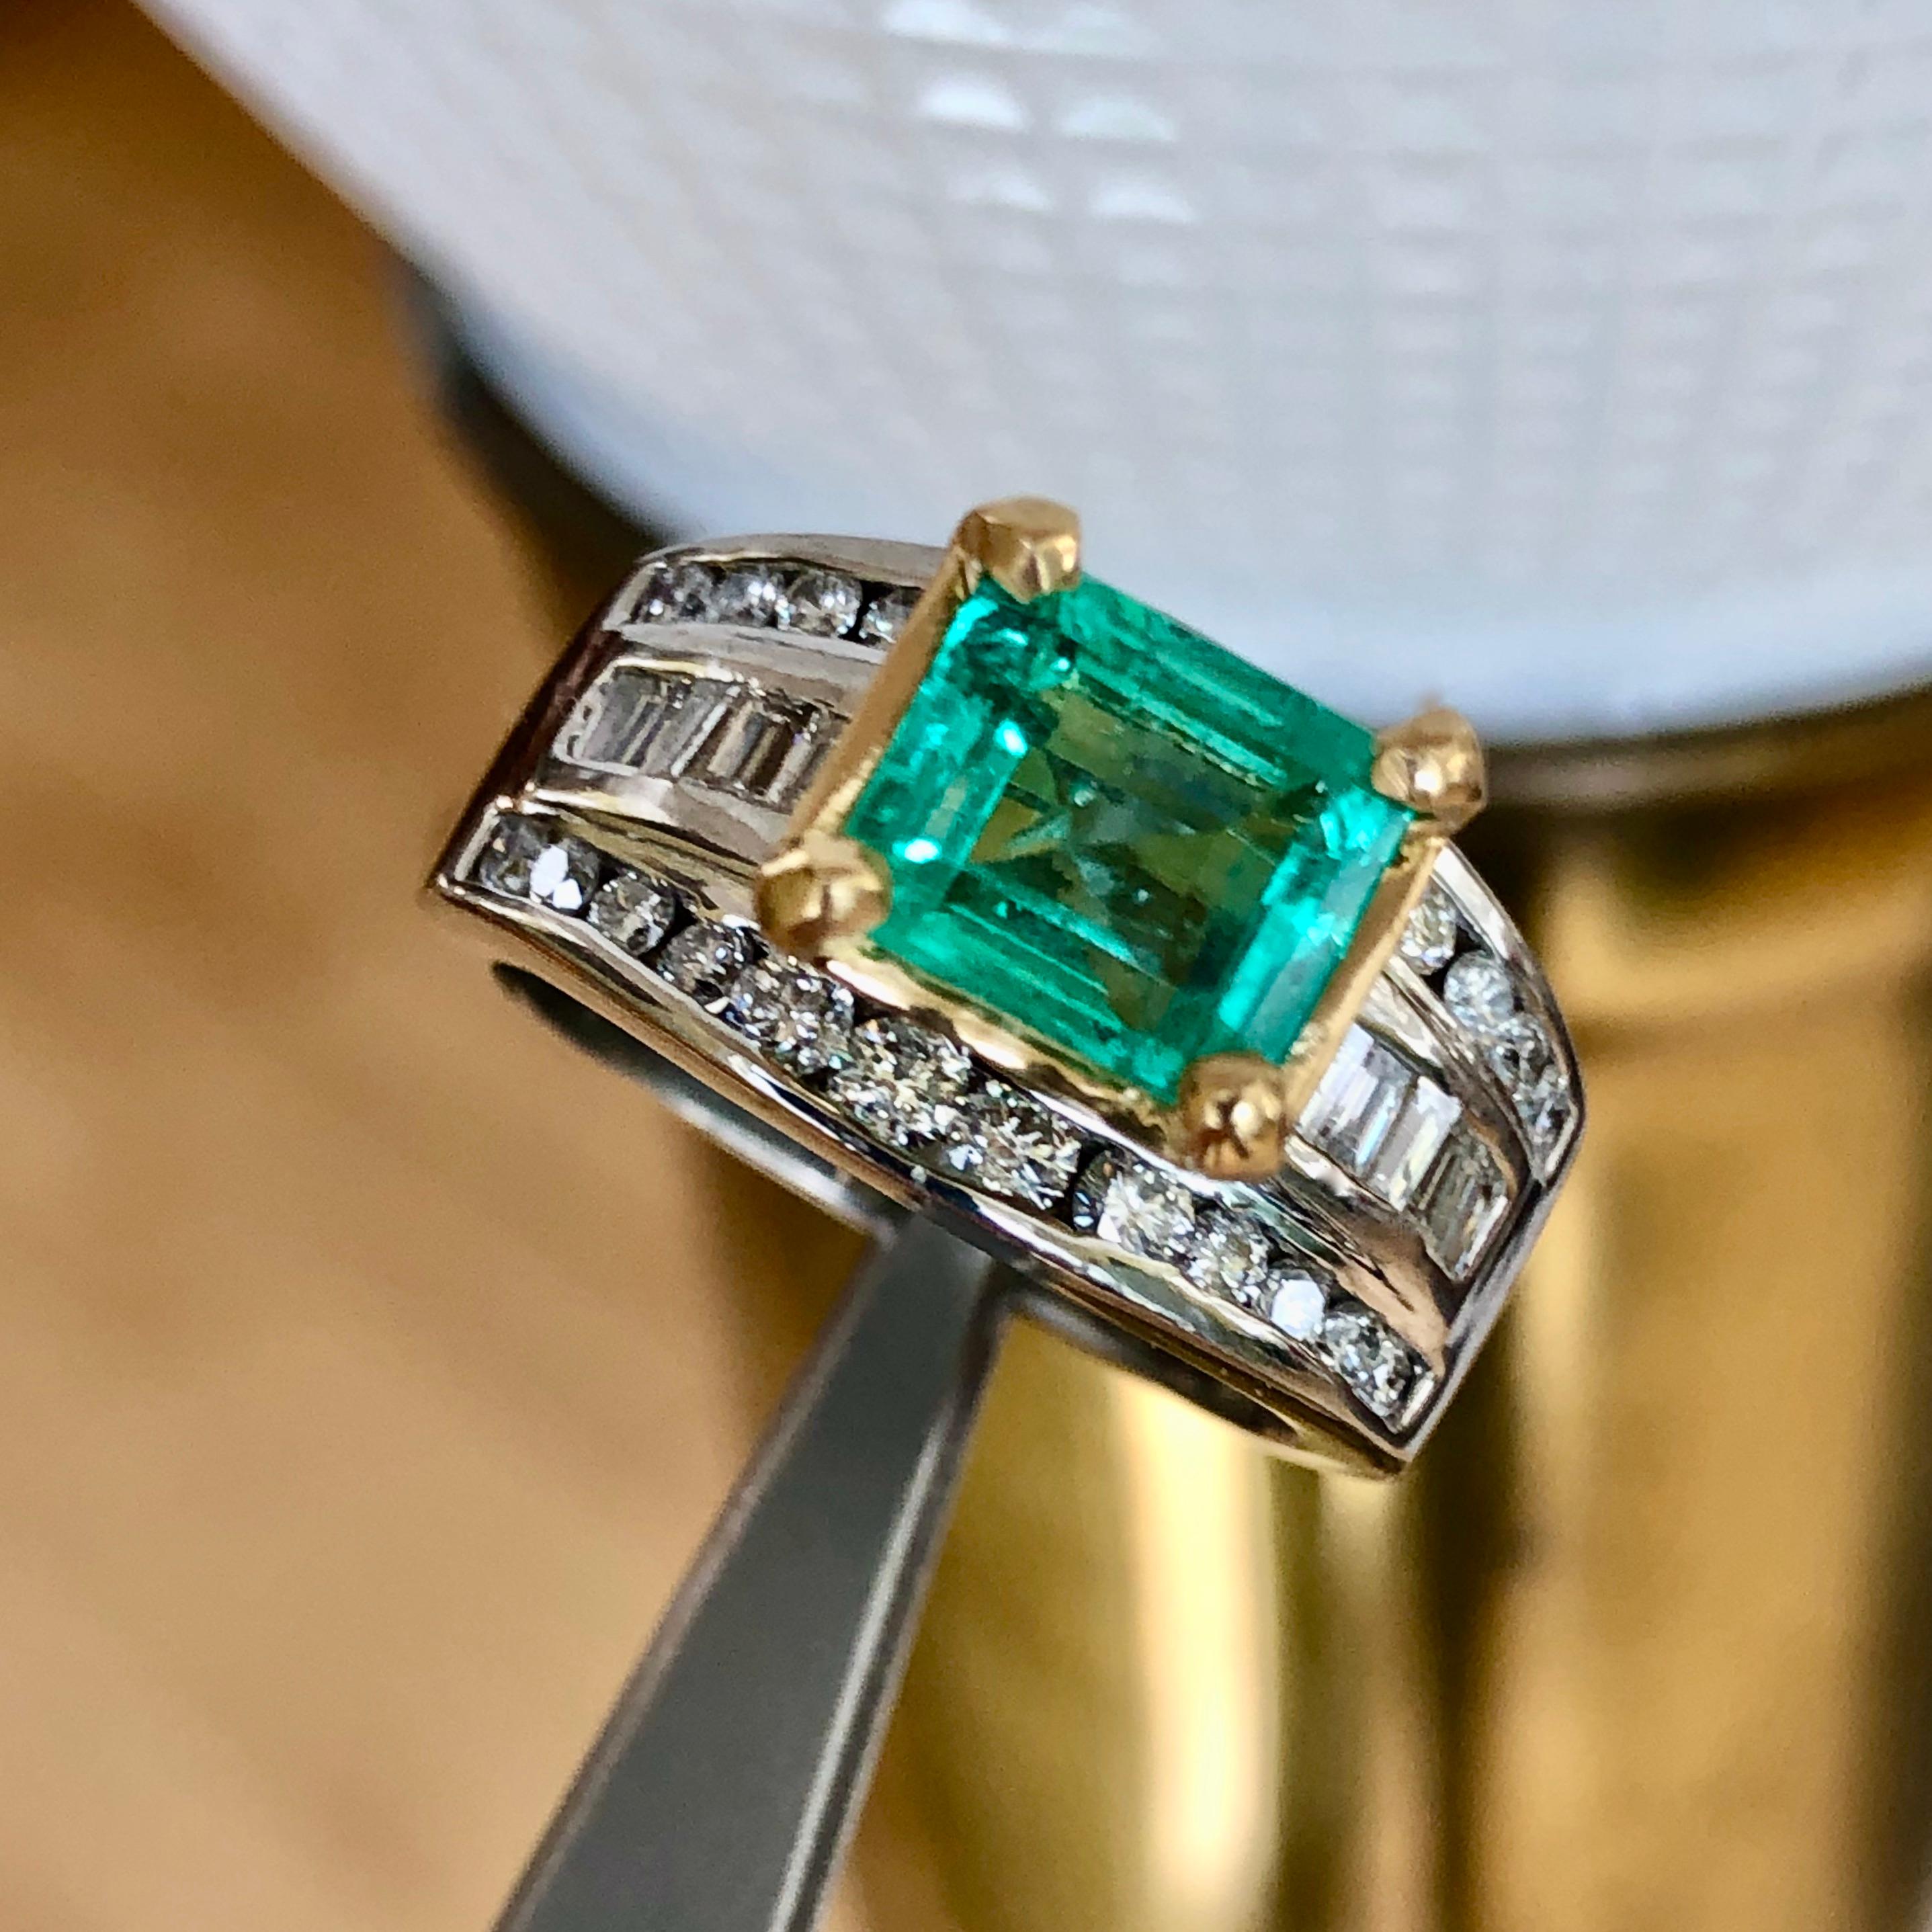 Custom Engagement Emerald Diamond Ring Set with a Sparkling Natural Colombian Emerald Medium Green 1.50 Carats and Natural white Diamonds 0.70 Carats G-VS. Total Gemstone Weight 2.20 Carats. 
This gorgeous ring is unique and well hand made!